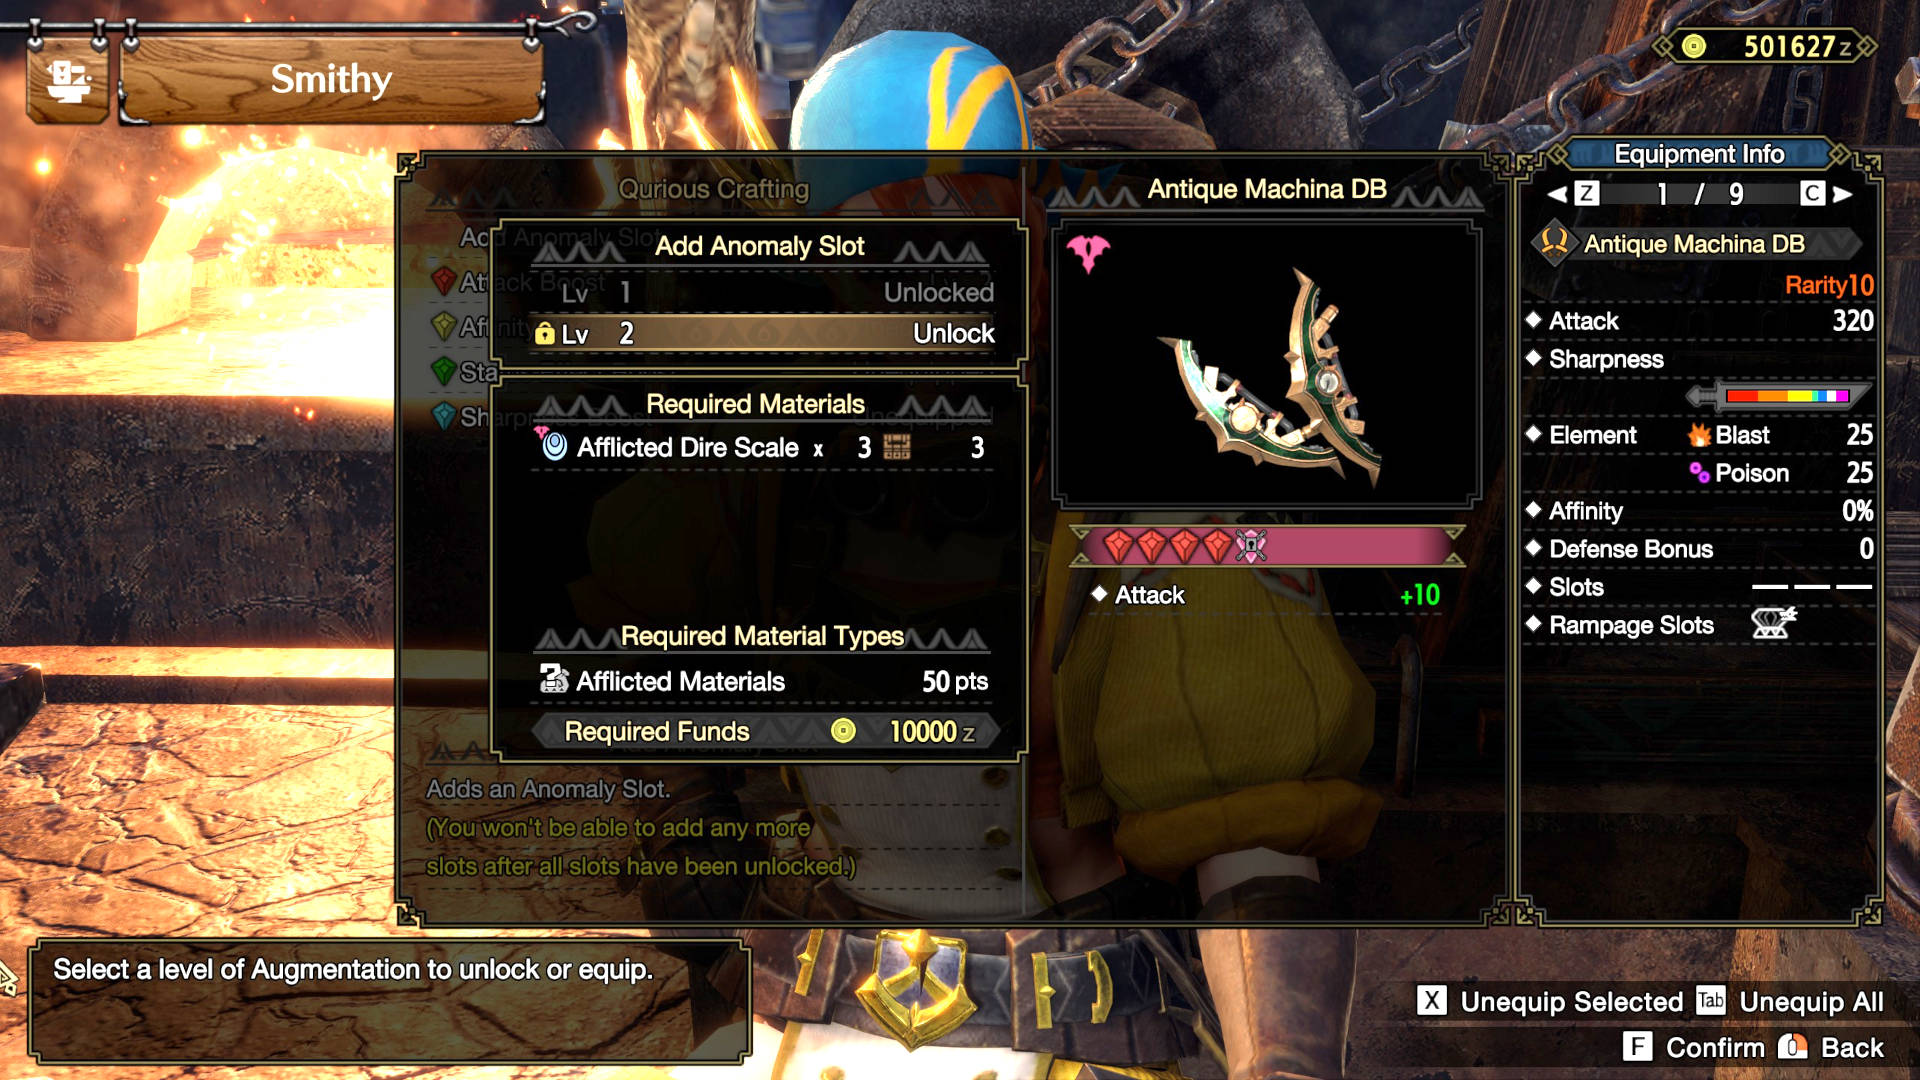 Monster Hunter Rise Sunbreak Anomaly Investigations: the Smithy showing Qurious Crafting, which allows you to spend high-ranking afflicted materials to add upgrades to weapons and armour. Here we see the option to add an anomaly slot to Antique Machina Dual Blades.